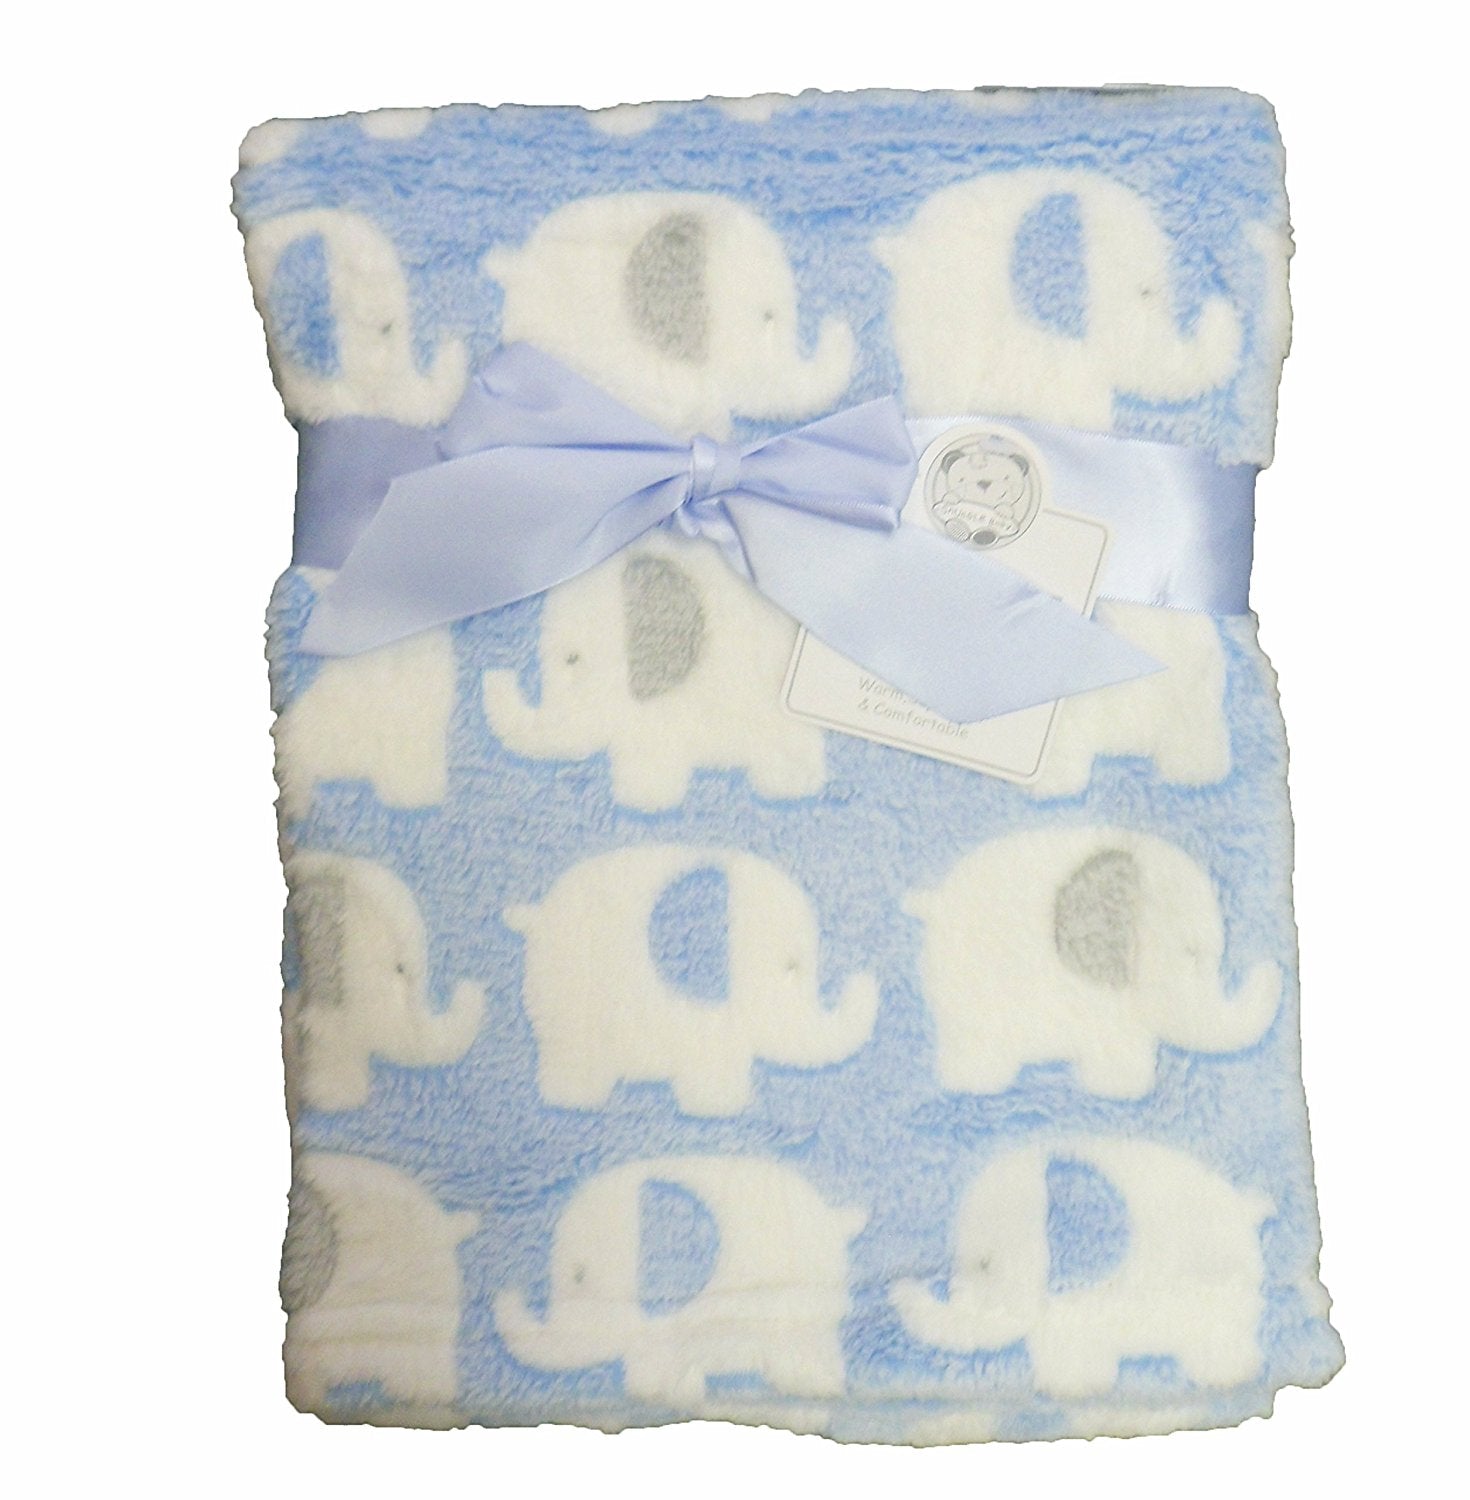 Supersoft Superior Luxurious Quality Blue With Cute Elephants Pram/Crib Blanket - hanrattycraftsgifts.co.uk